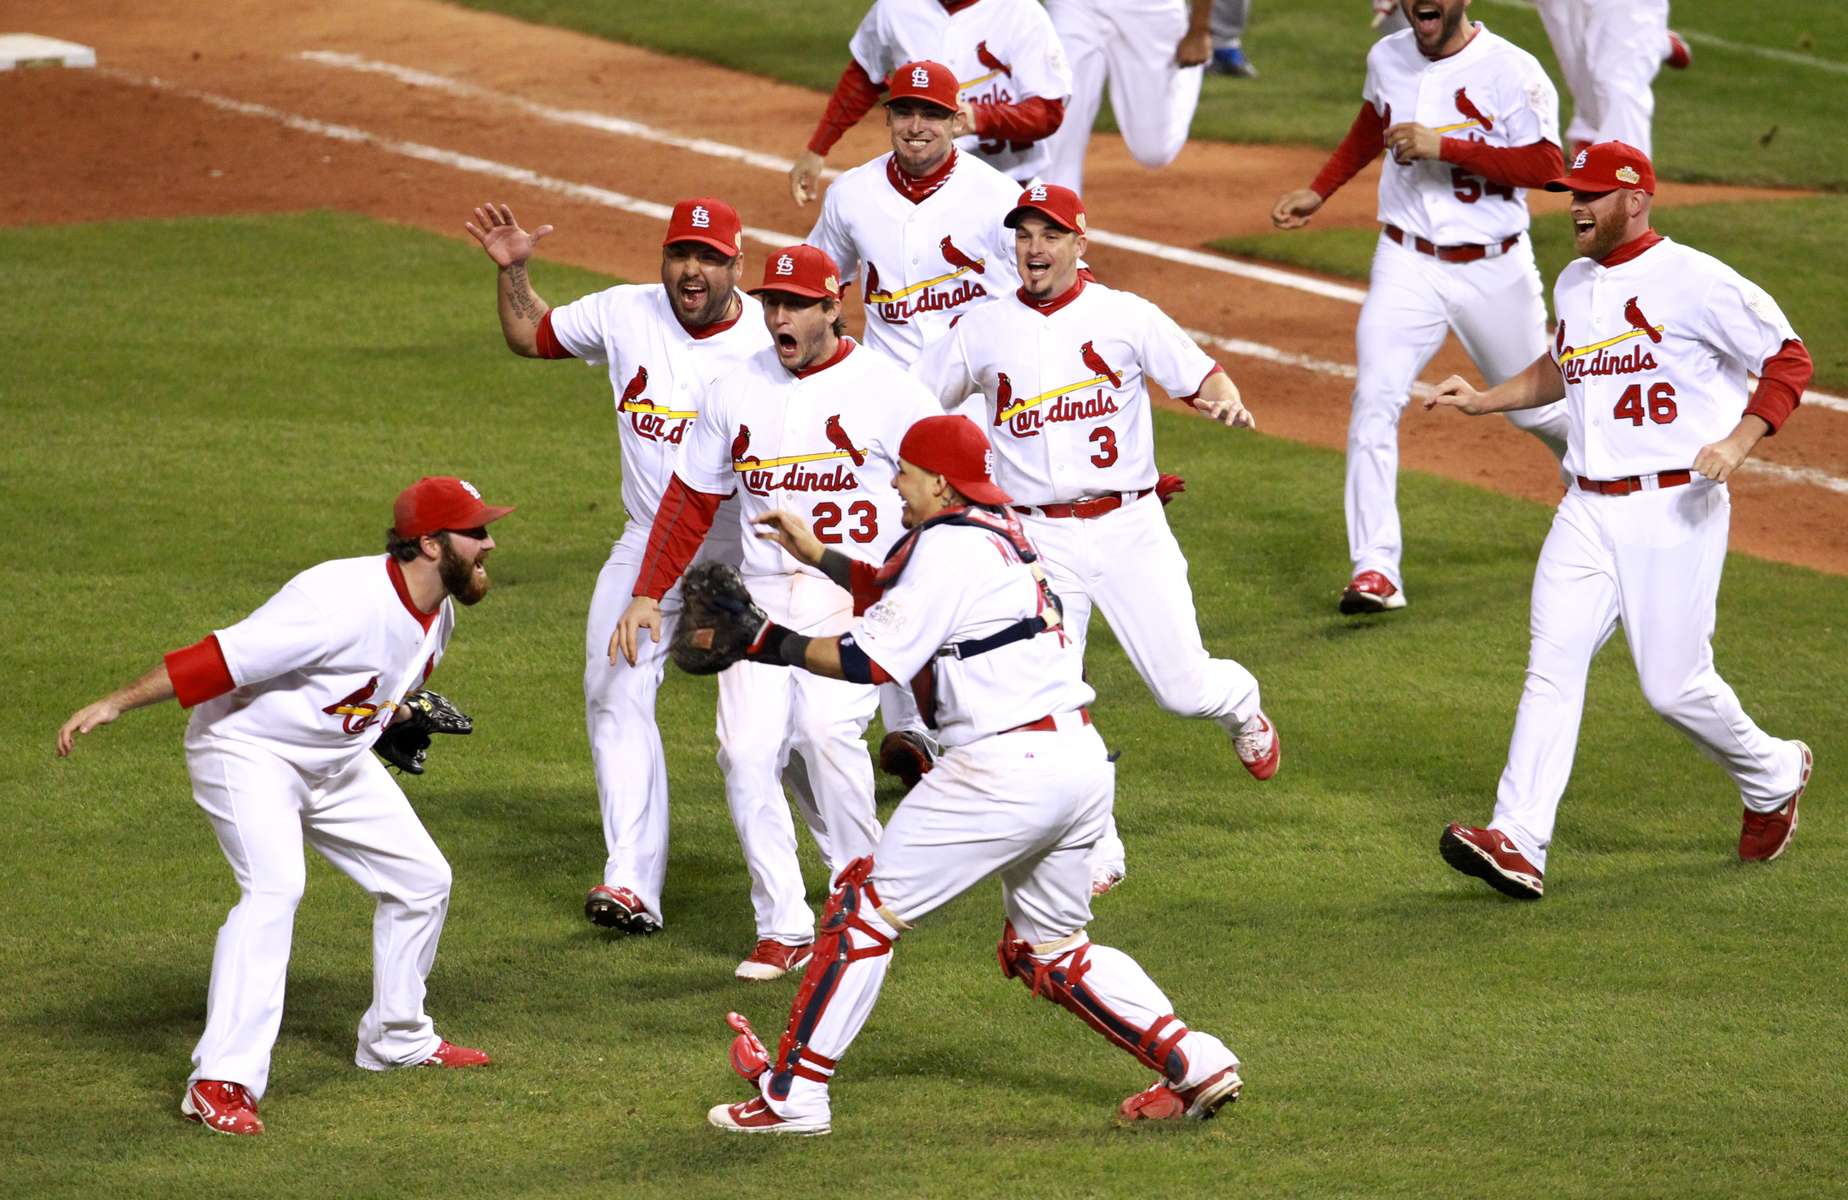 The St. Louis Cardinals celebrate their victory in Game 7 of the World Series between the Texas Rangers and St. Louis Cardinals at Busch Stadium on Friday October 28, 2011 in St. Louis.Photo by  David Carson, dcarson@post-dispatch.com